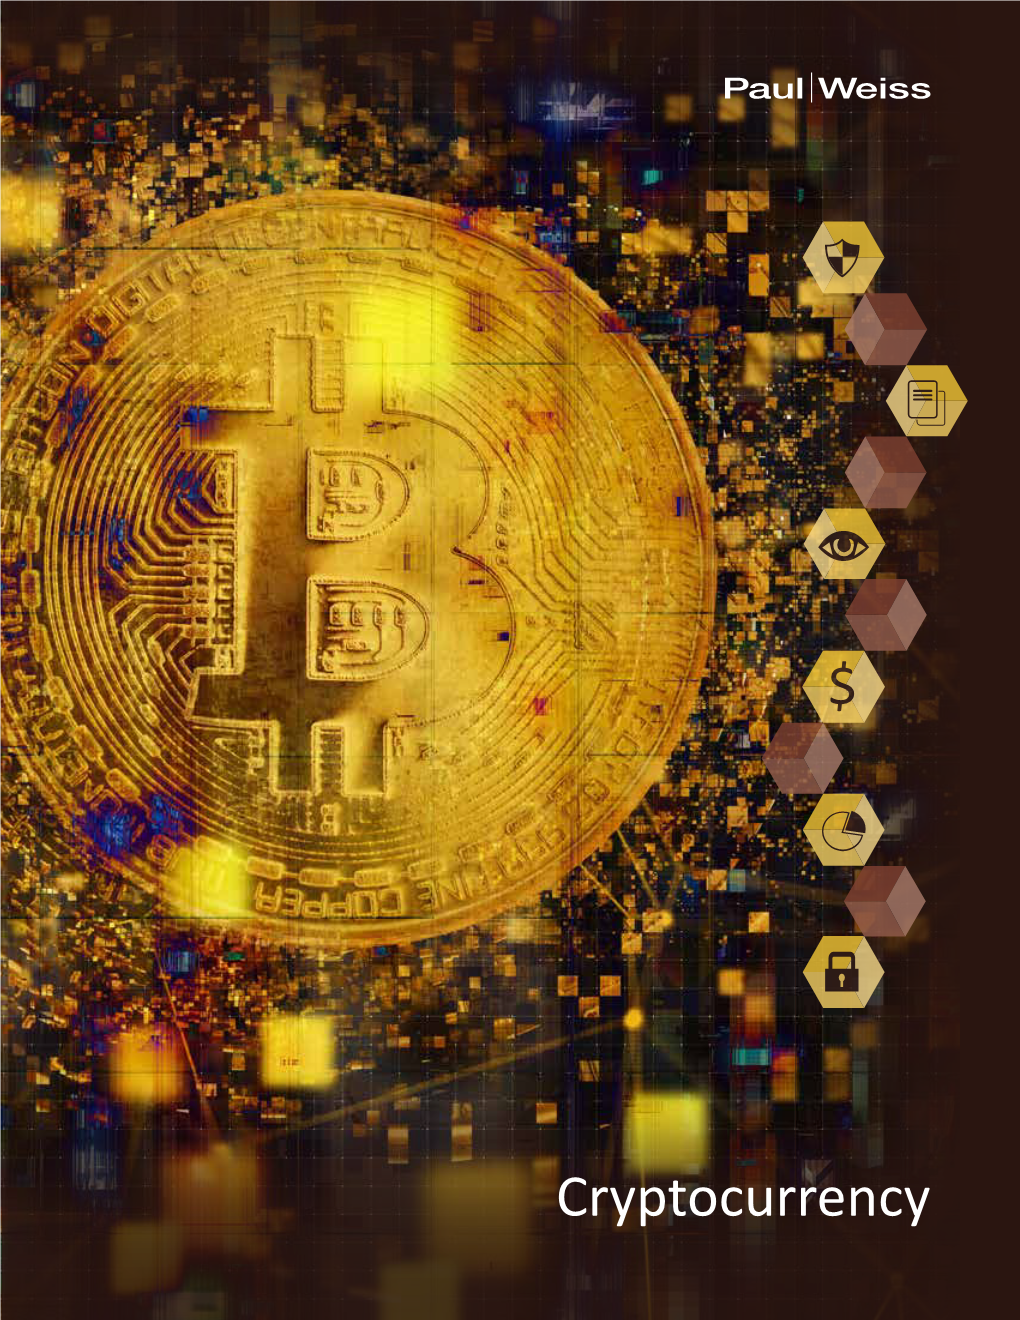 Cryptocurrency the Development and Growth of Cryptocurrencies and Blockchain Technology Has Implications for Many Industries, Including Finance, Media, and Healthcare